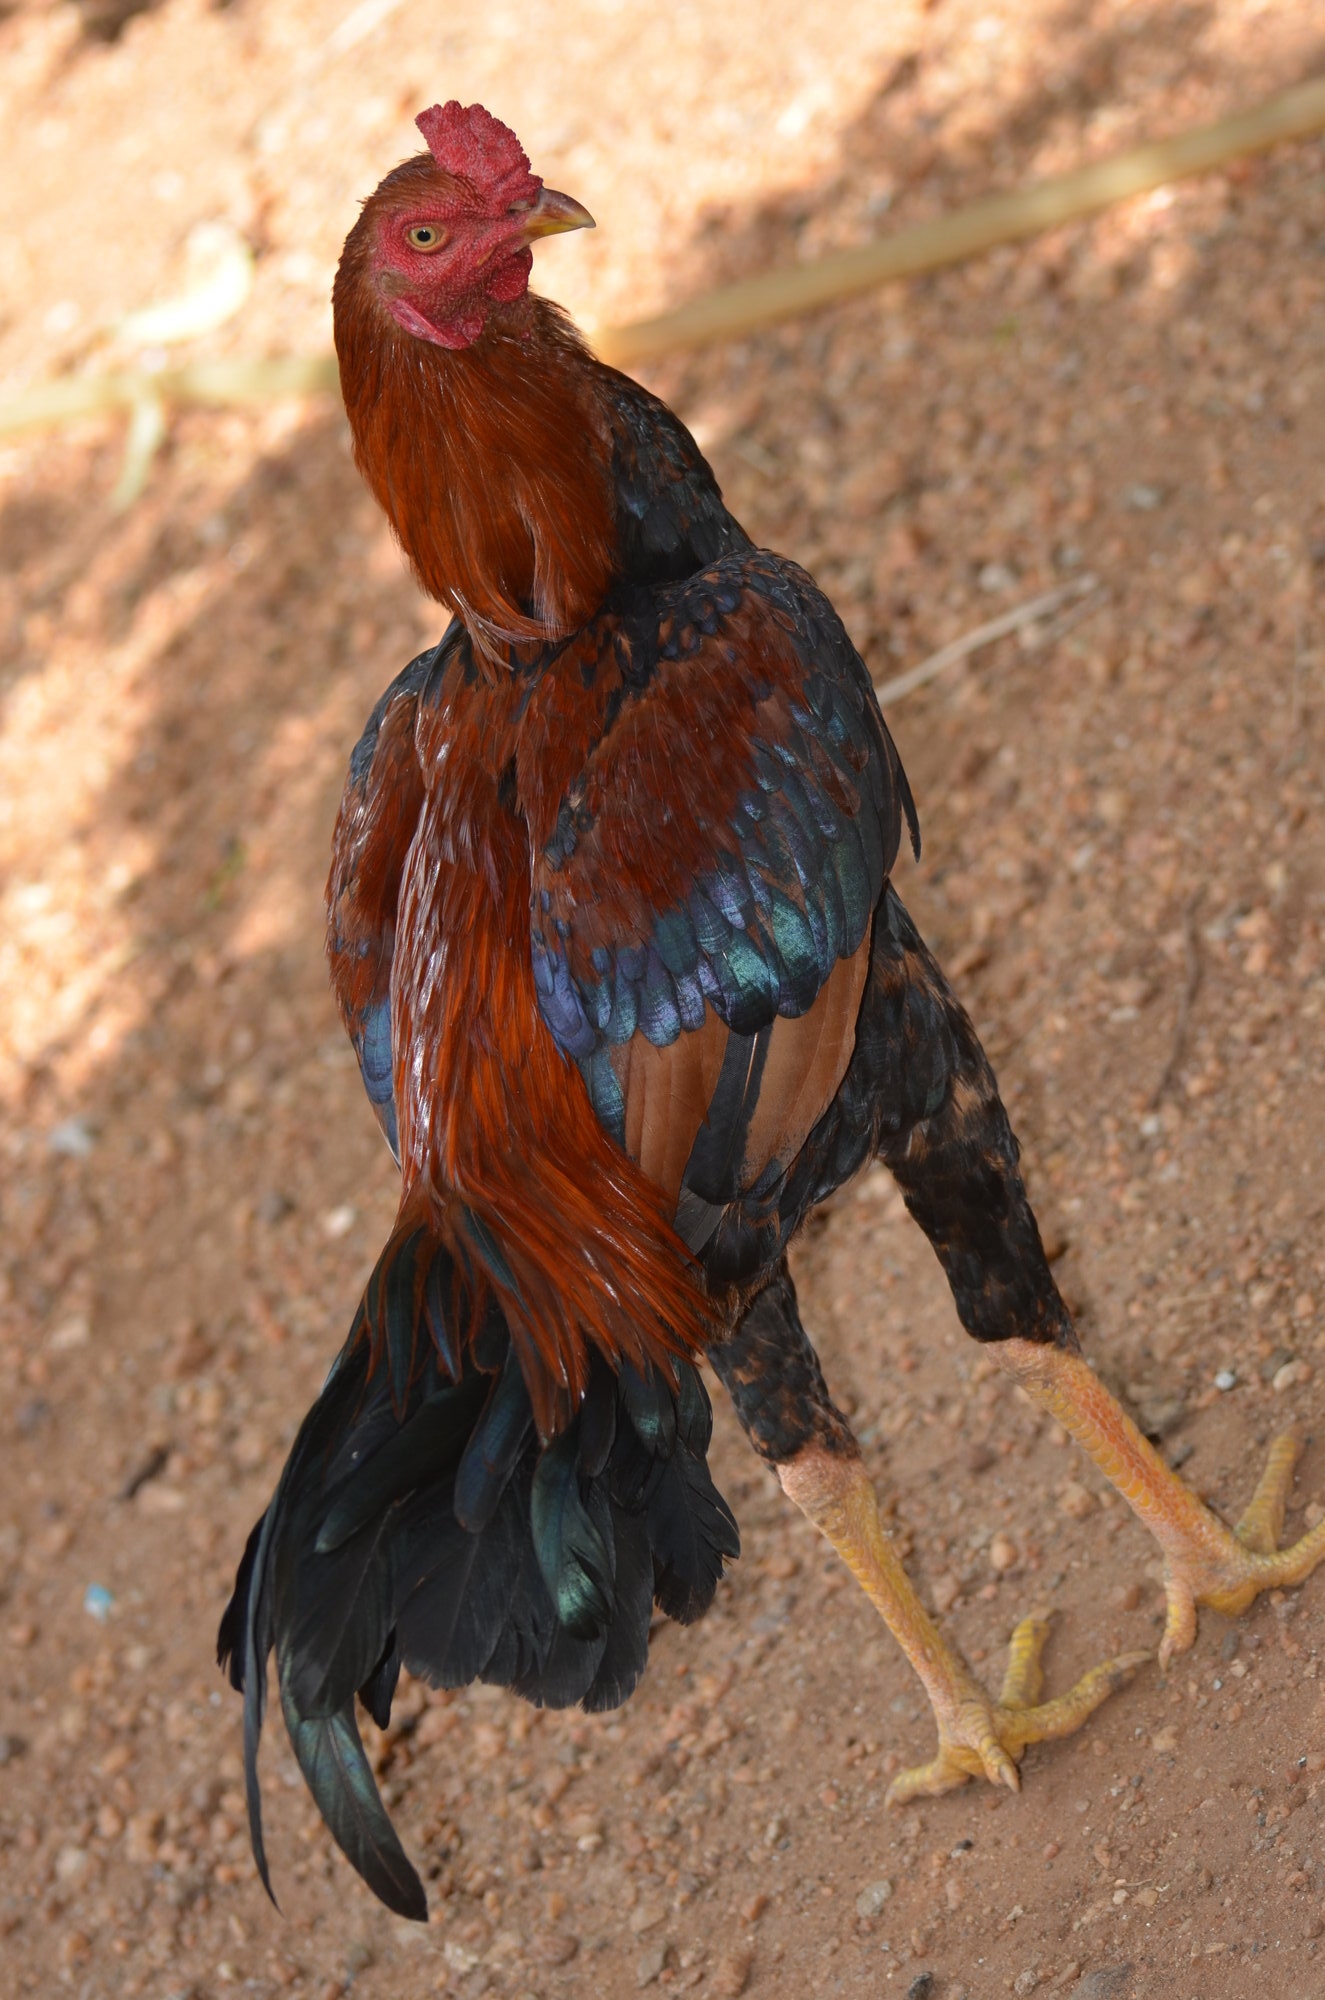 Our 8 month Old Cockerel 'Copper' with unique Tail Coverts